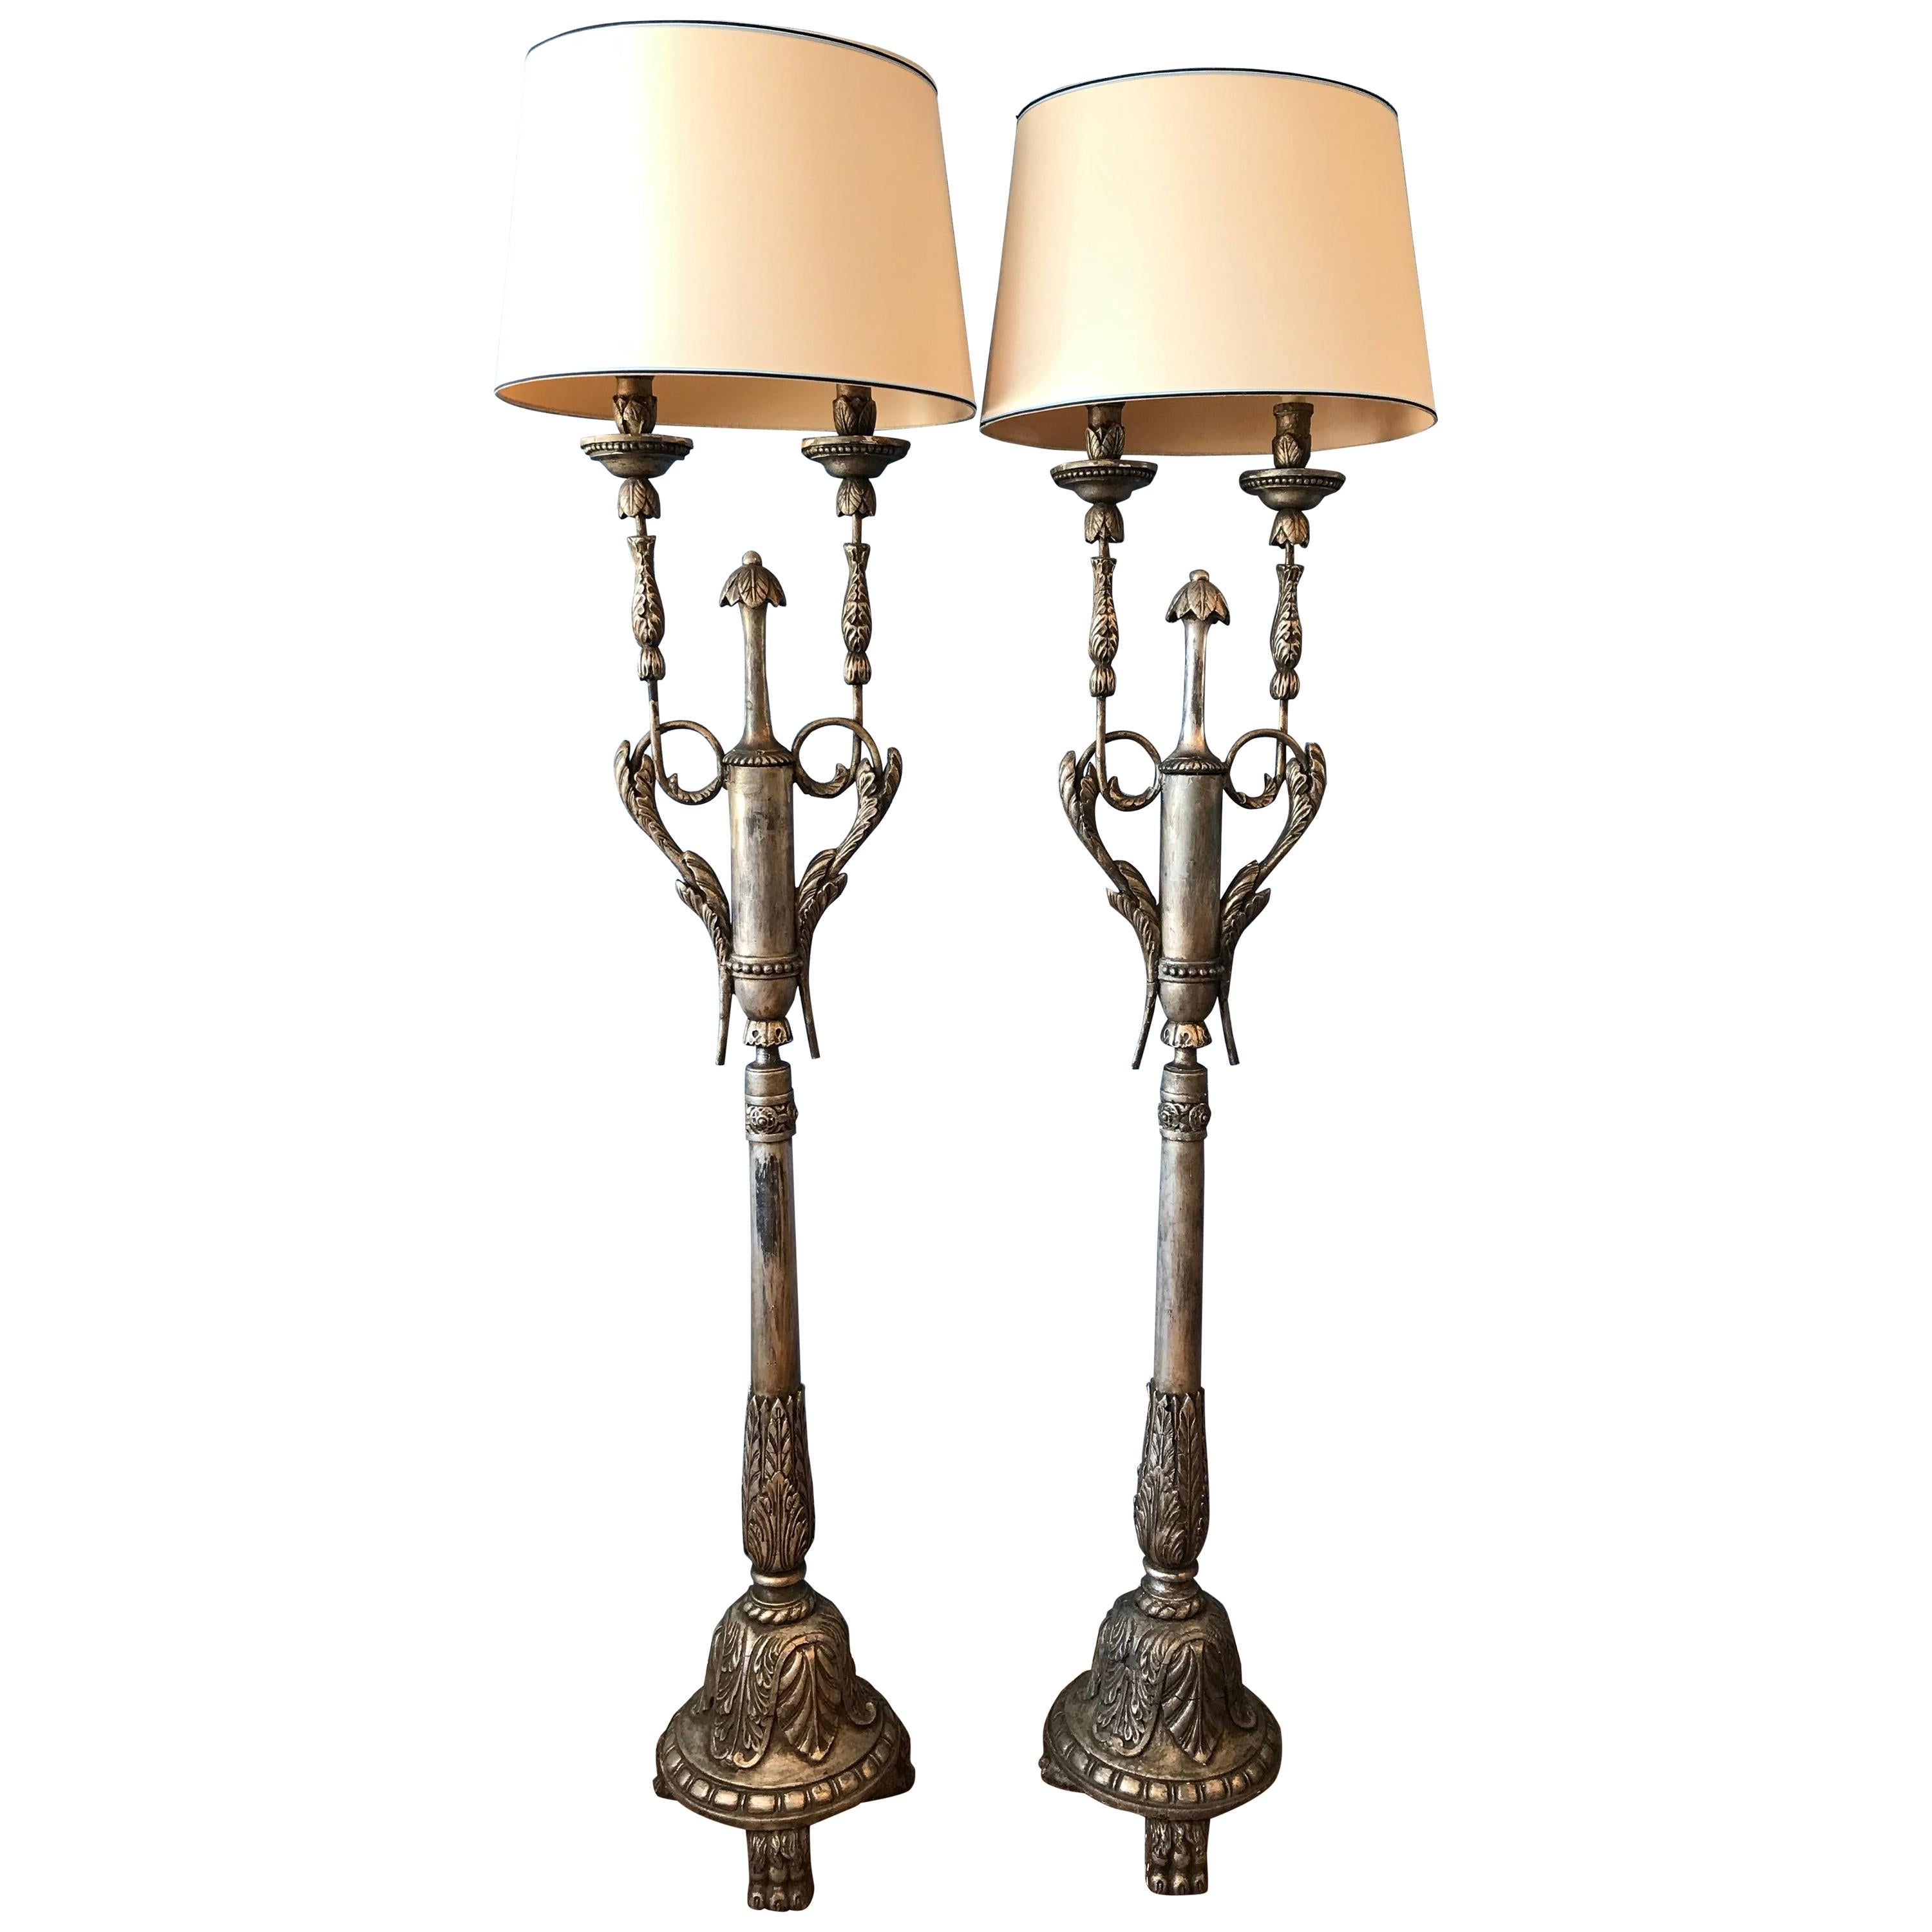 Pair of Silver-Leaf Carved Wood Torchieres / Floor Lamps